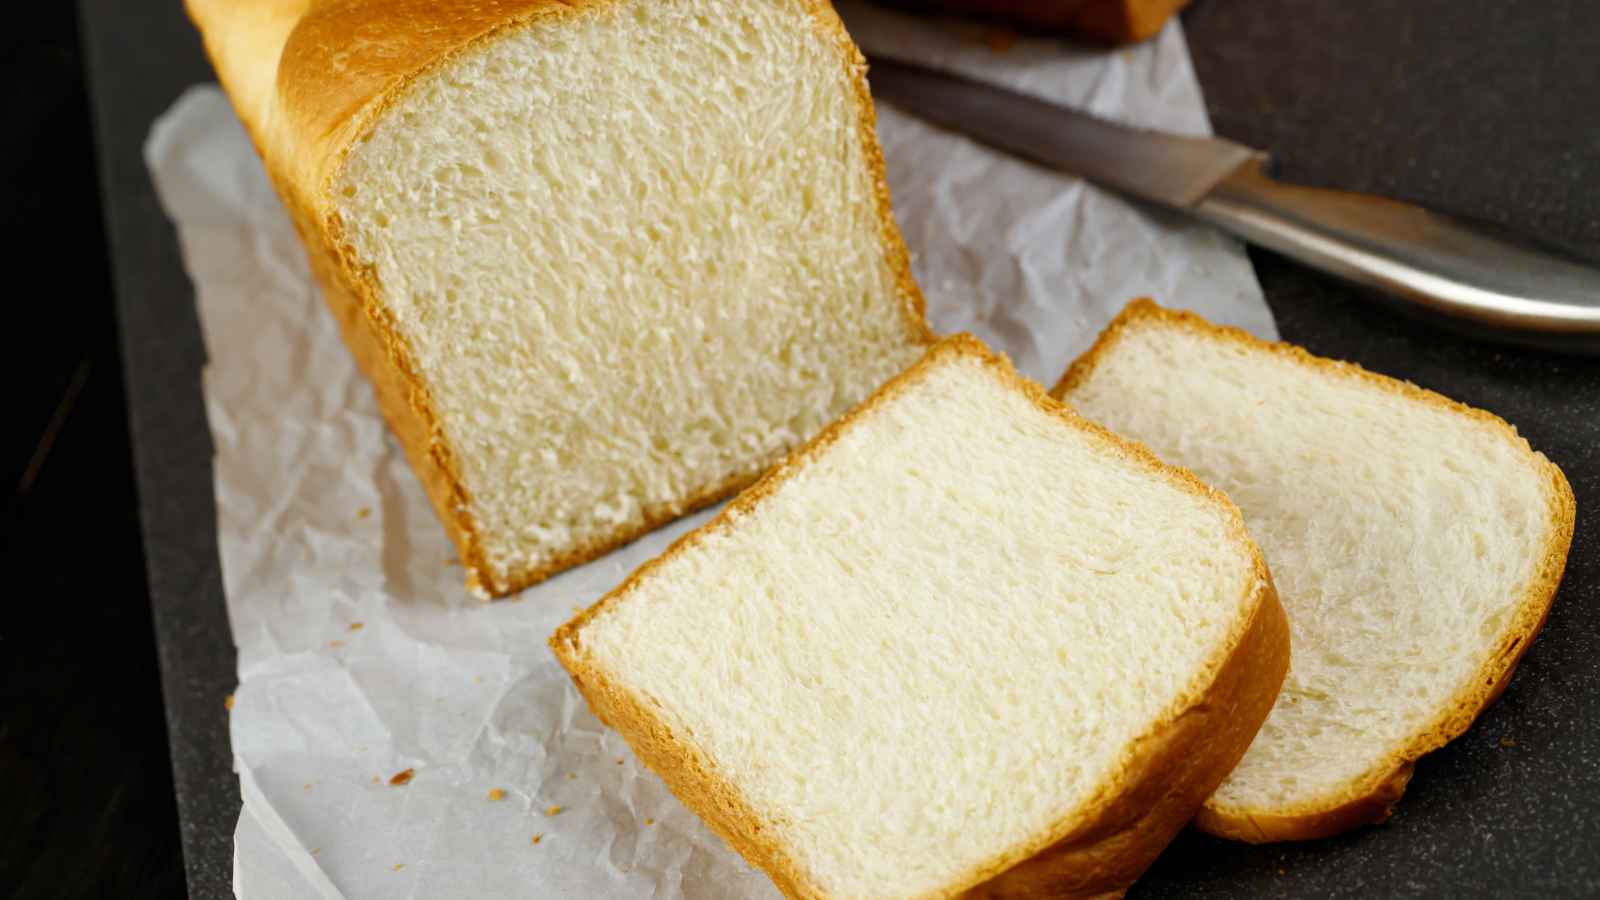 <p><span>Like a wolf in sheep’s clothing, processed white bread looks harmless but can mess up your blood sugar faster than you can say “gluten”! Experts wave red flags about its fast-digesting carbs.</span></p>